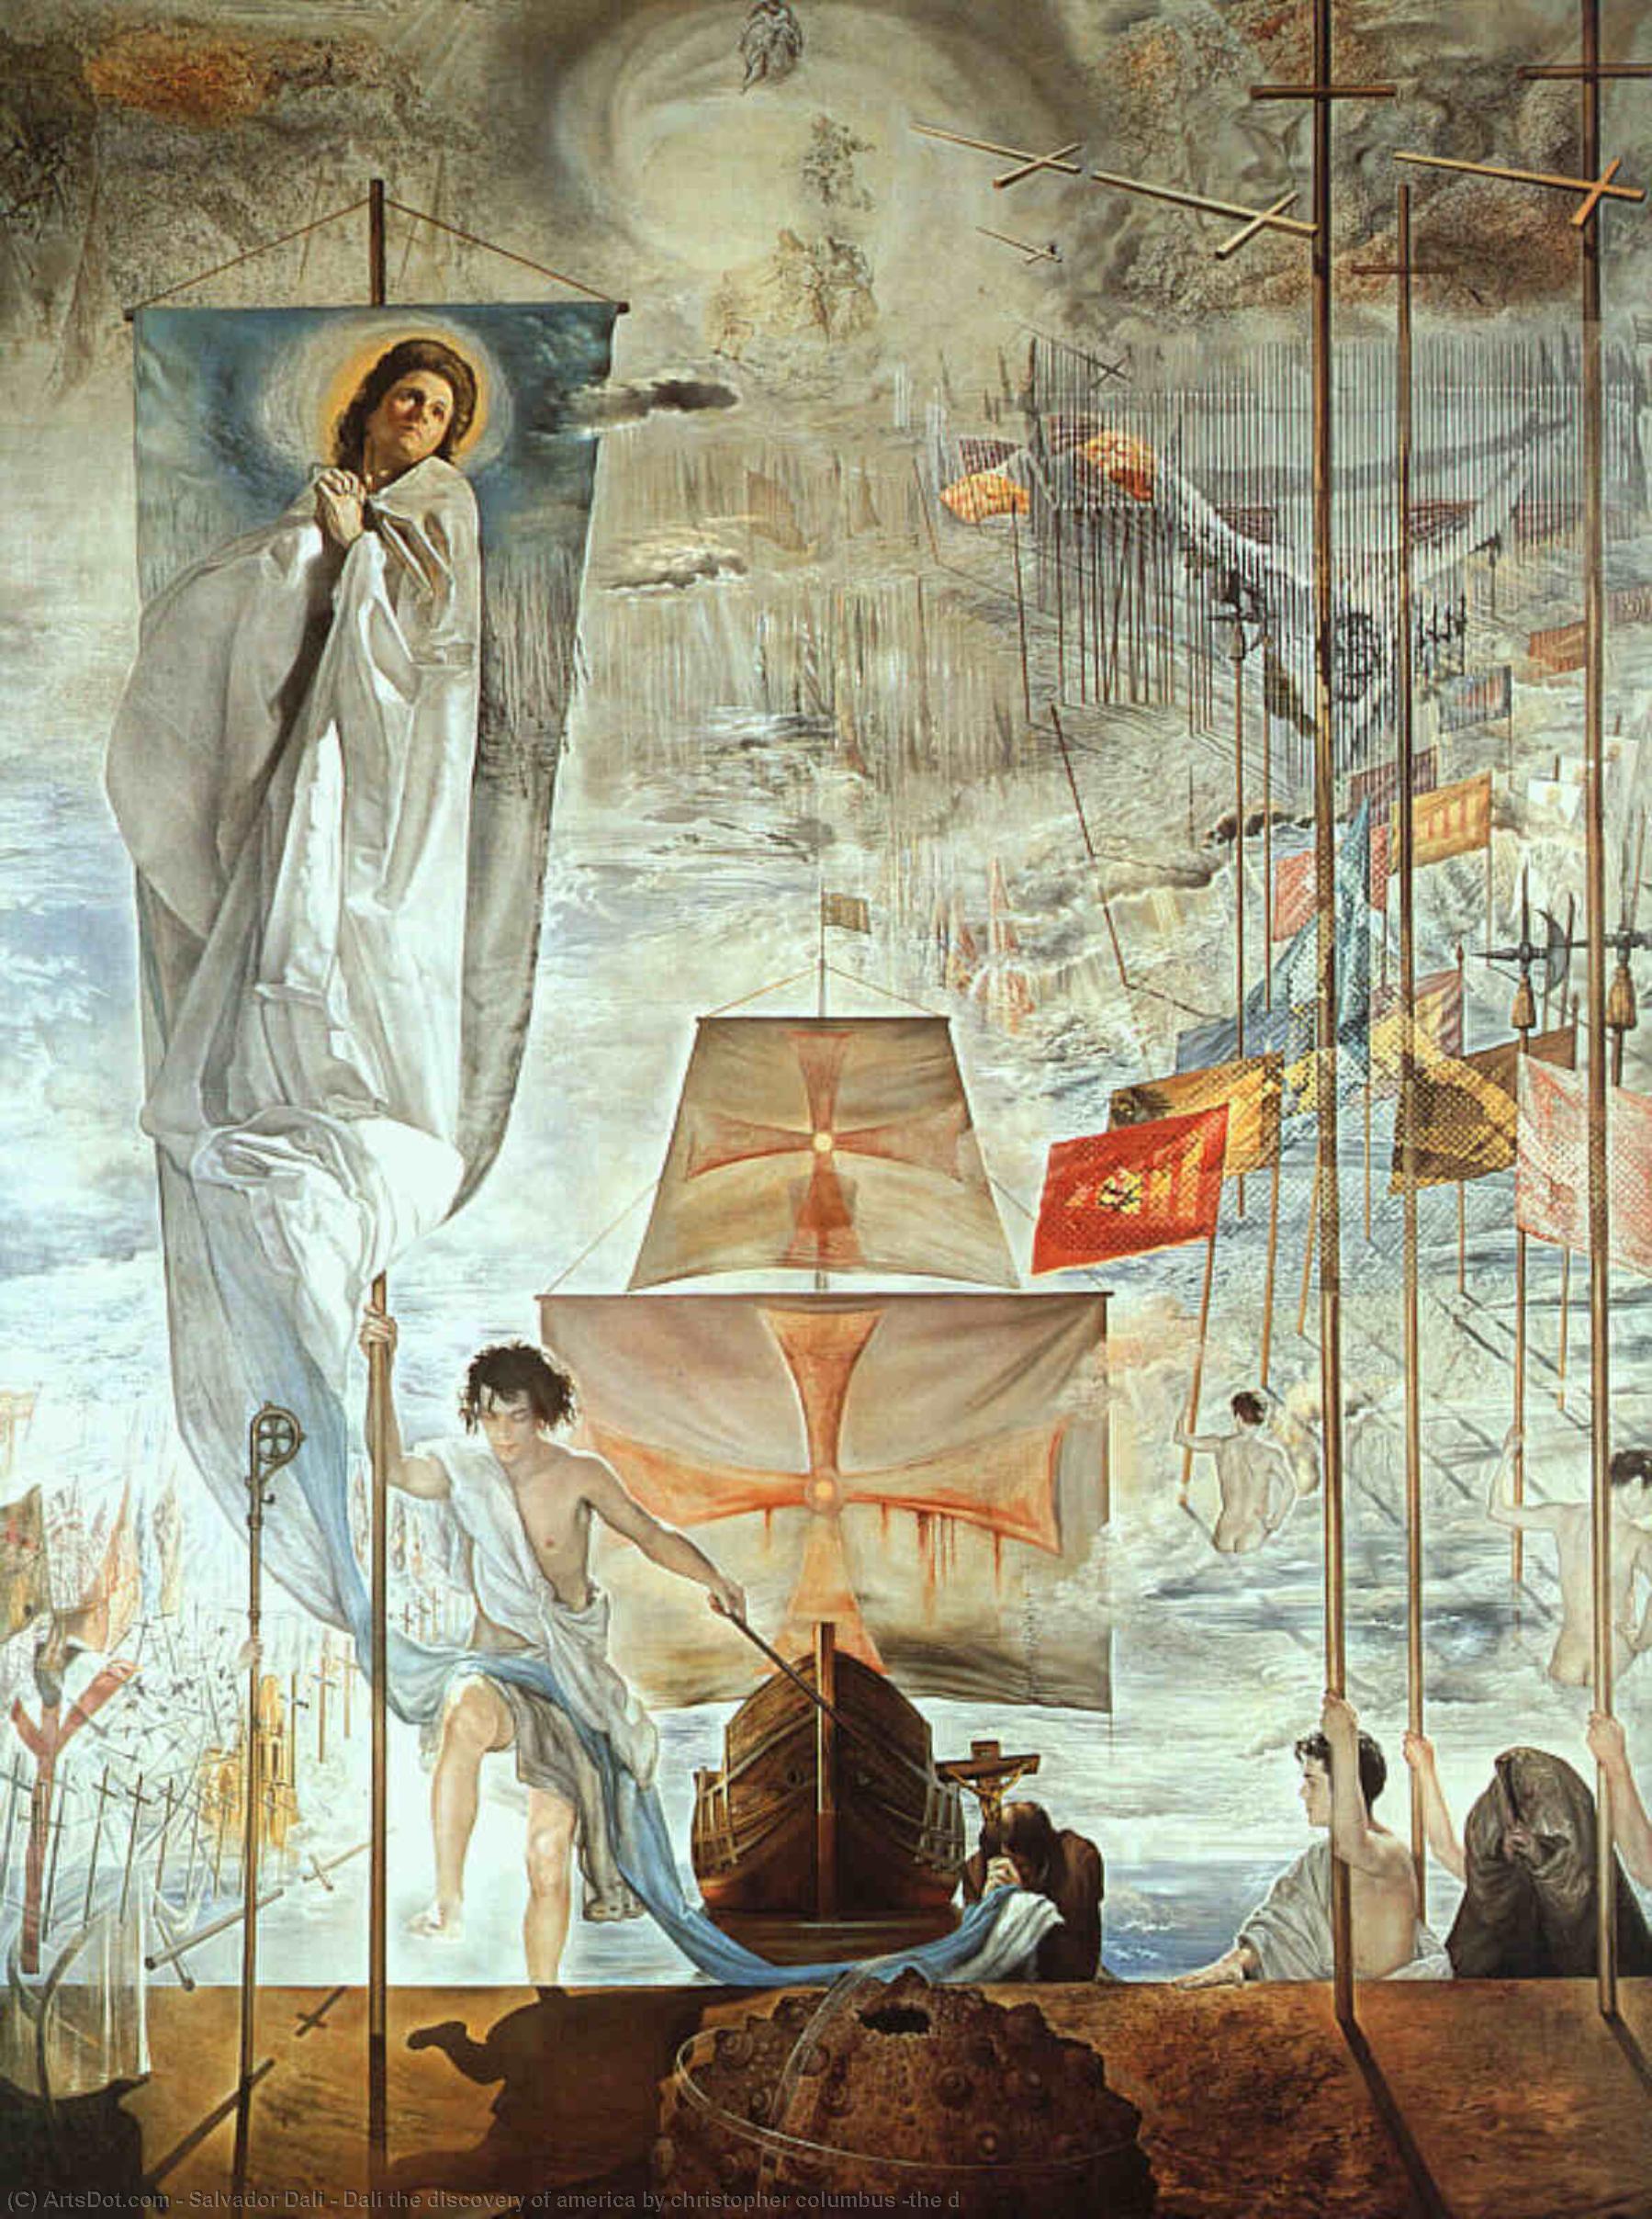 WikiOO.org - Encyclopedia of Fine Arts - Maalaus, taideteos Salvador Dali - Dalí the discovery of america by christopher columbus (the d